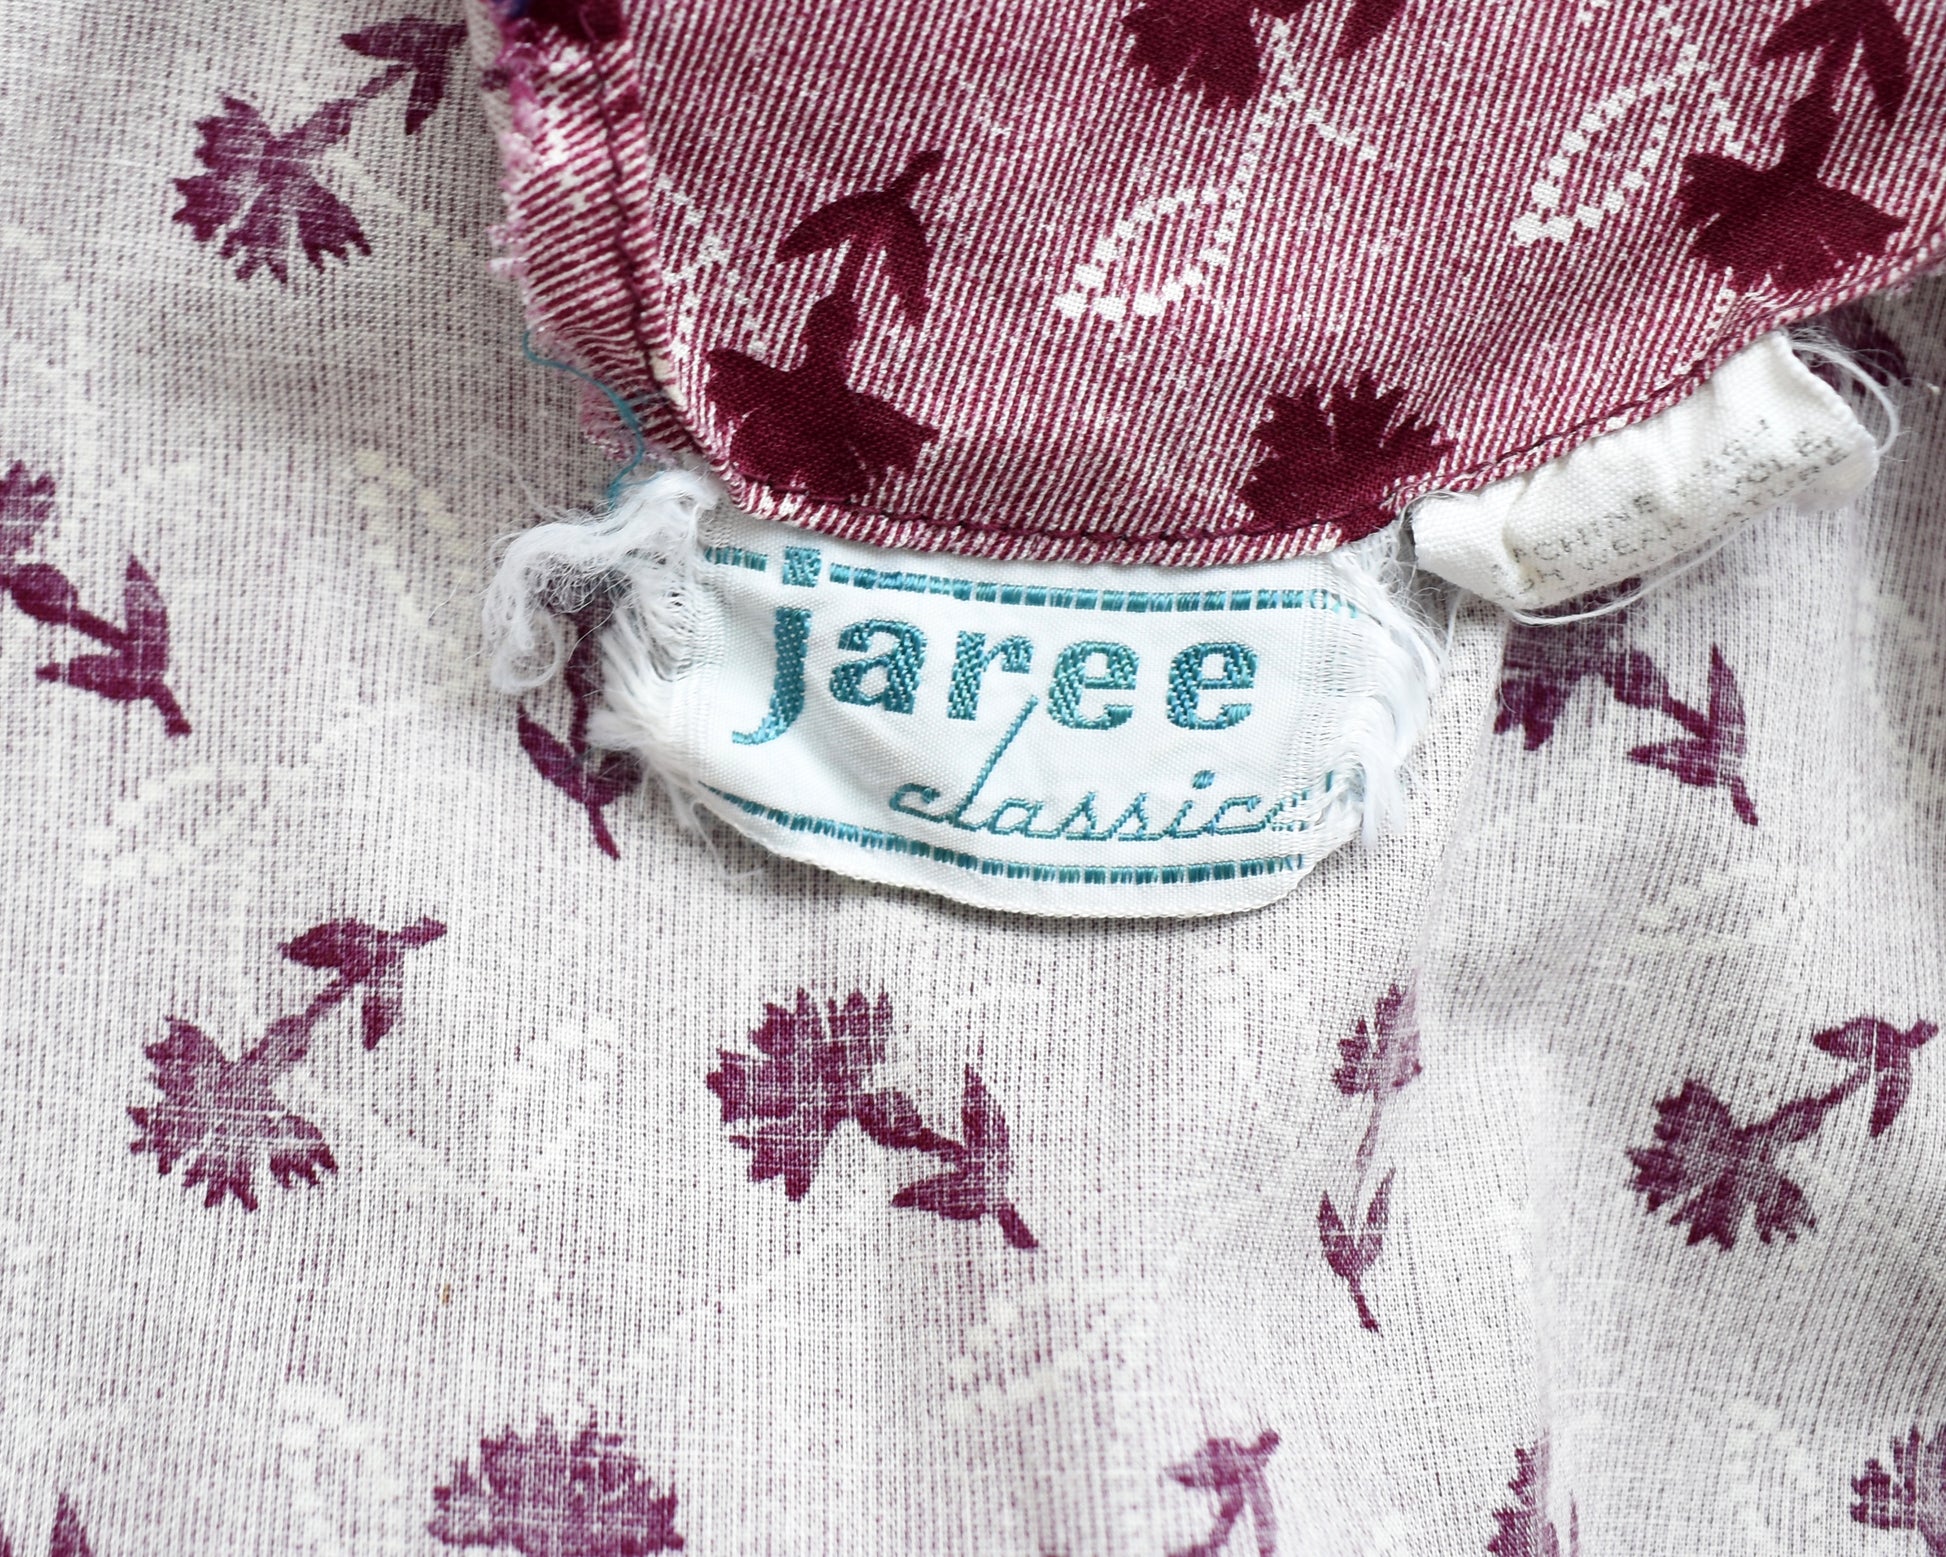 Close up of the tag which says jaree classics